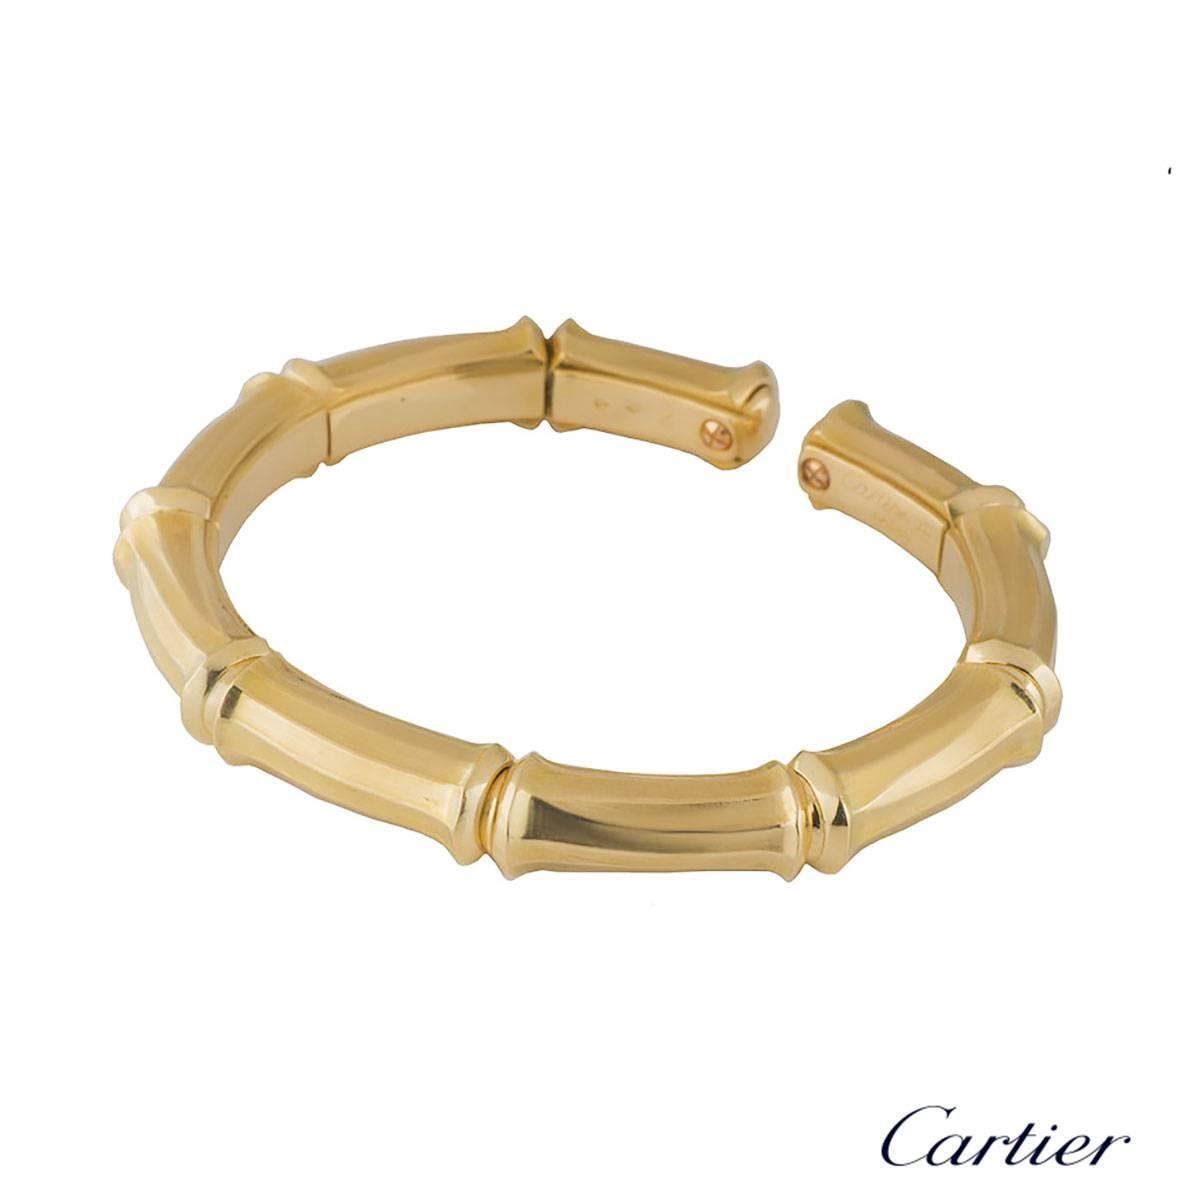 A vintage 18k yellow gold Cartier from the Bamboo collection. The open work bangle comprises of 9 bamboo flexi links. The bangle would fit a wrist of up to 16.5cm and has a gross weight of 54.40 grams.

The bangle comes complete with a RichDiamonds